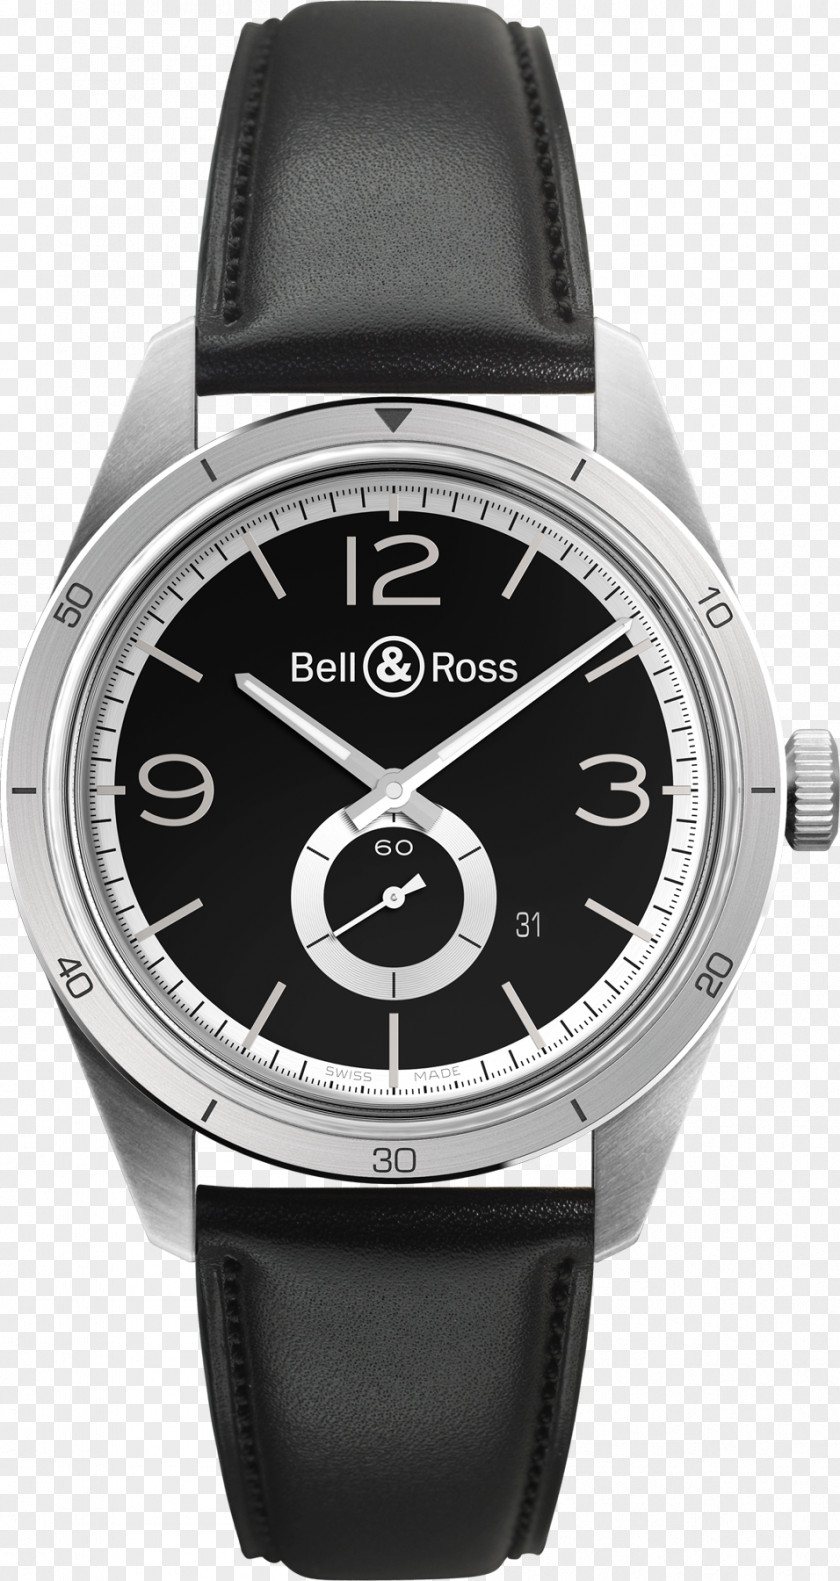 Watch Strap Bell & Ross, Inc. Chronograph PNG